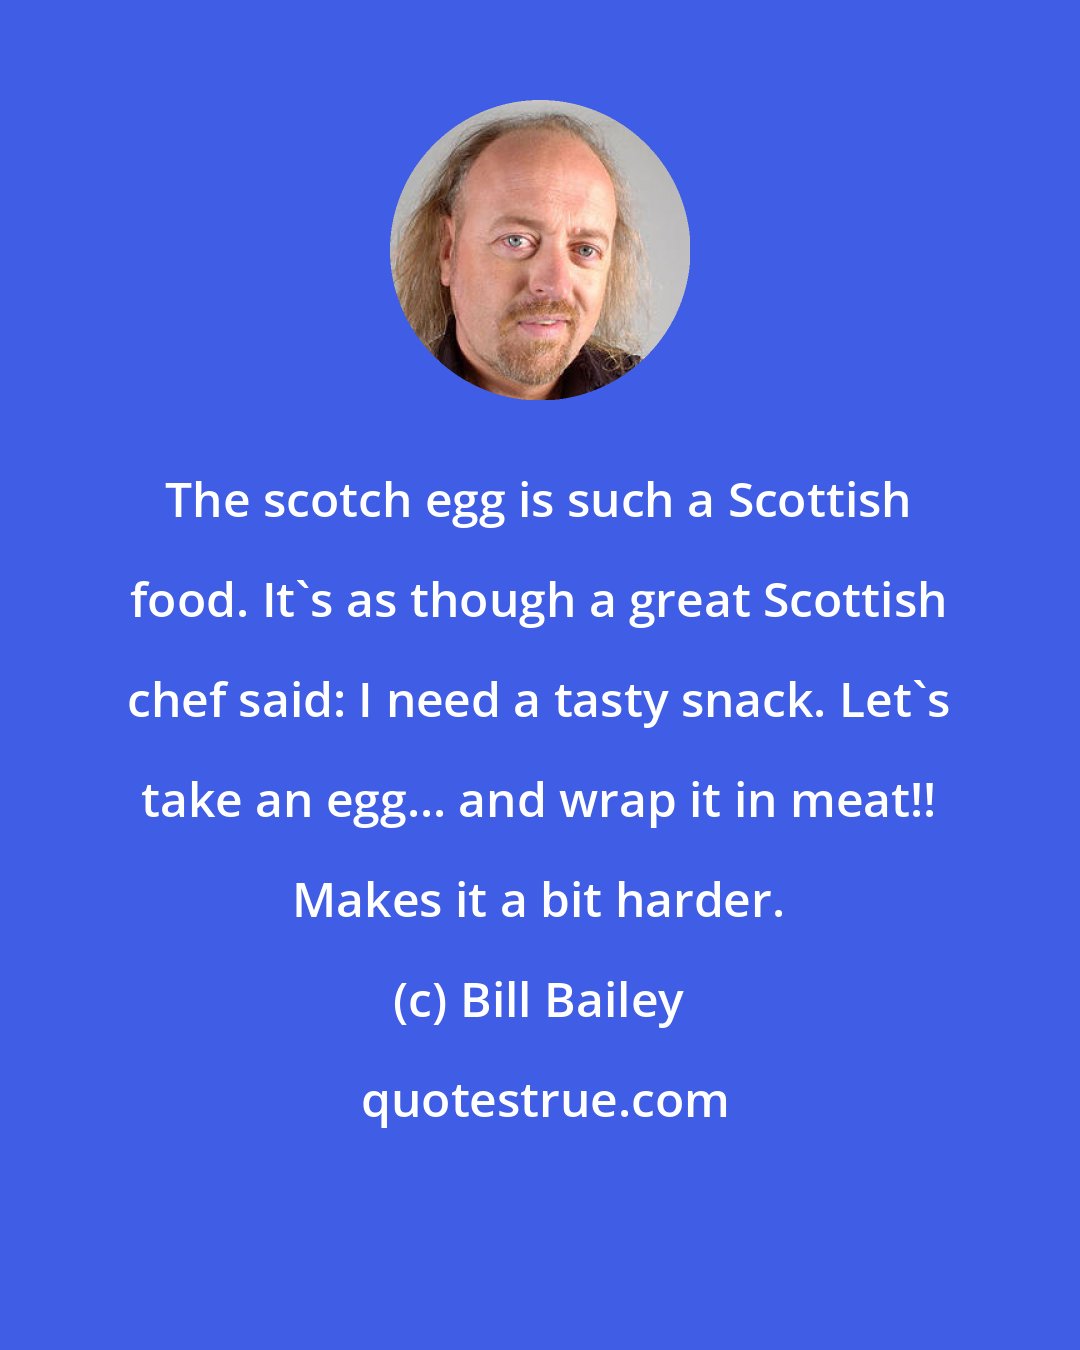 Bill Bailey: The scotch egg is such a Scottish food. It's as though a great Scottish chef said: I need a tasty snack. Let's take an egg... and wrap it in meat!! Makes it a bit harder.